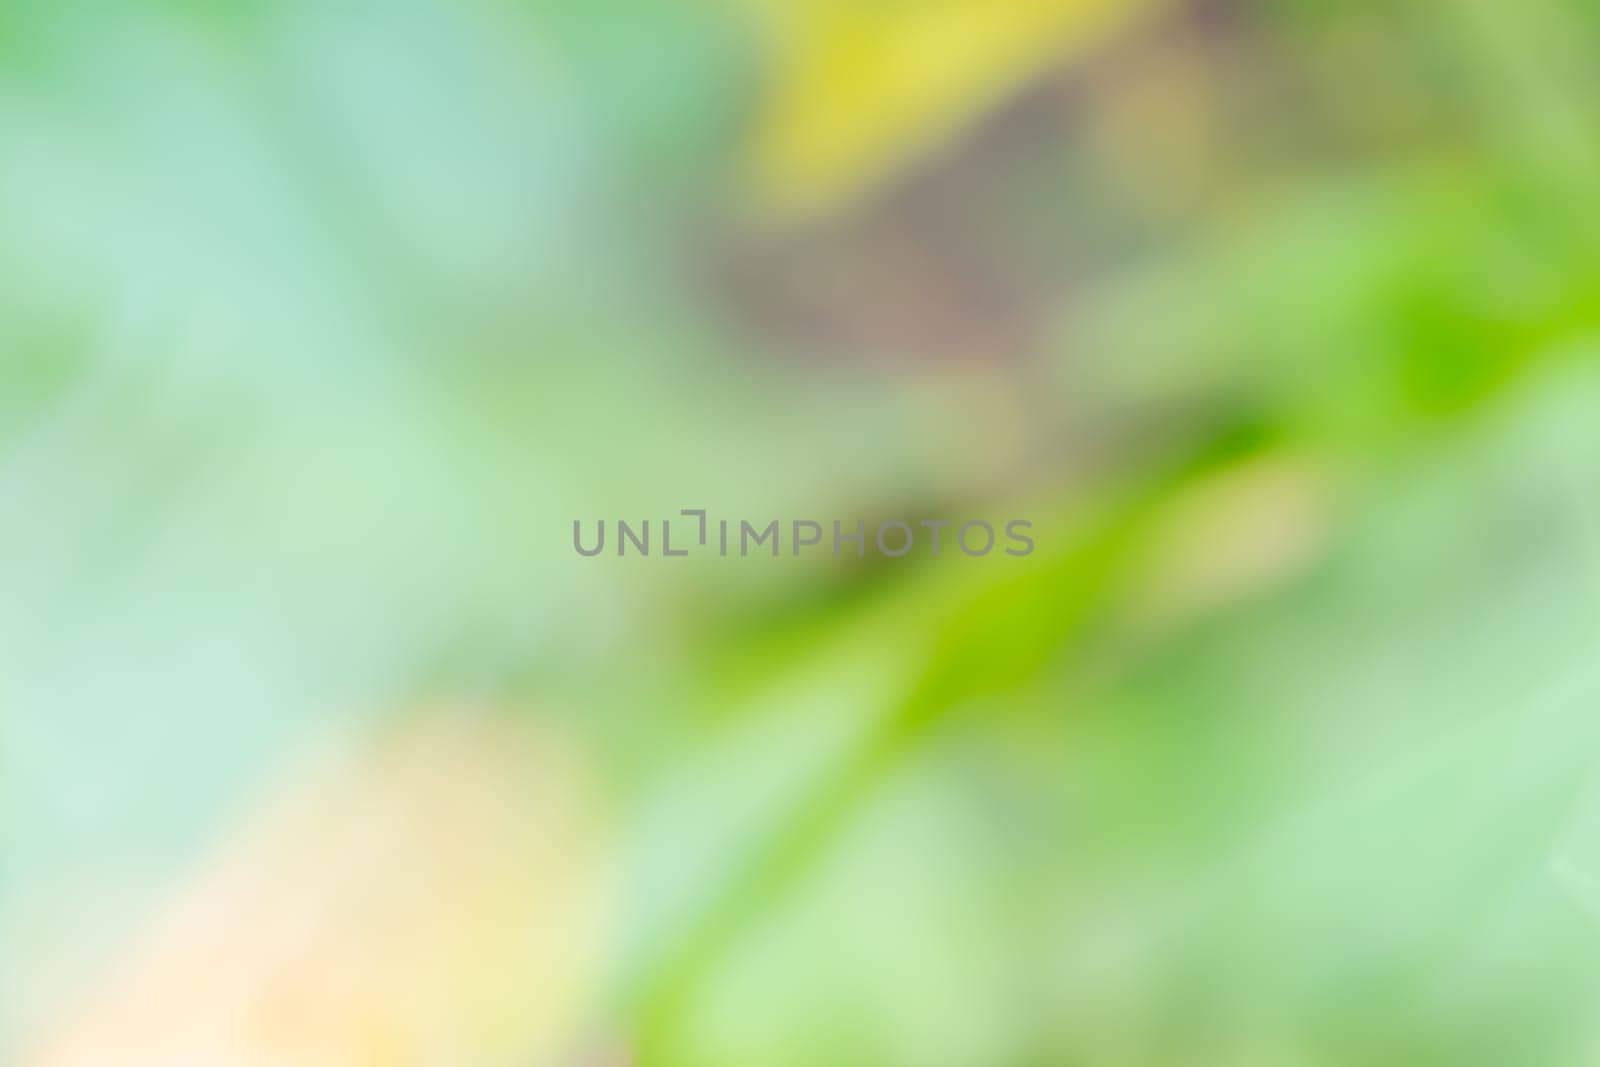 Blurred juicy abstract green background with gradient. Backdrop